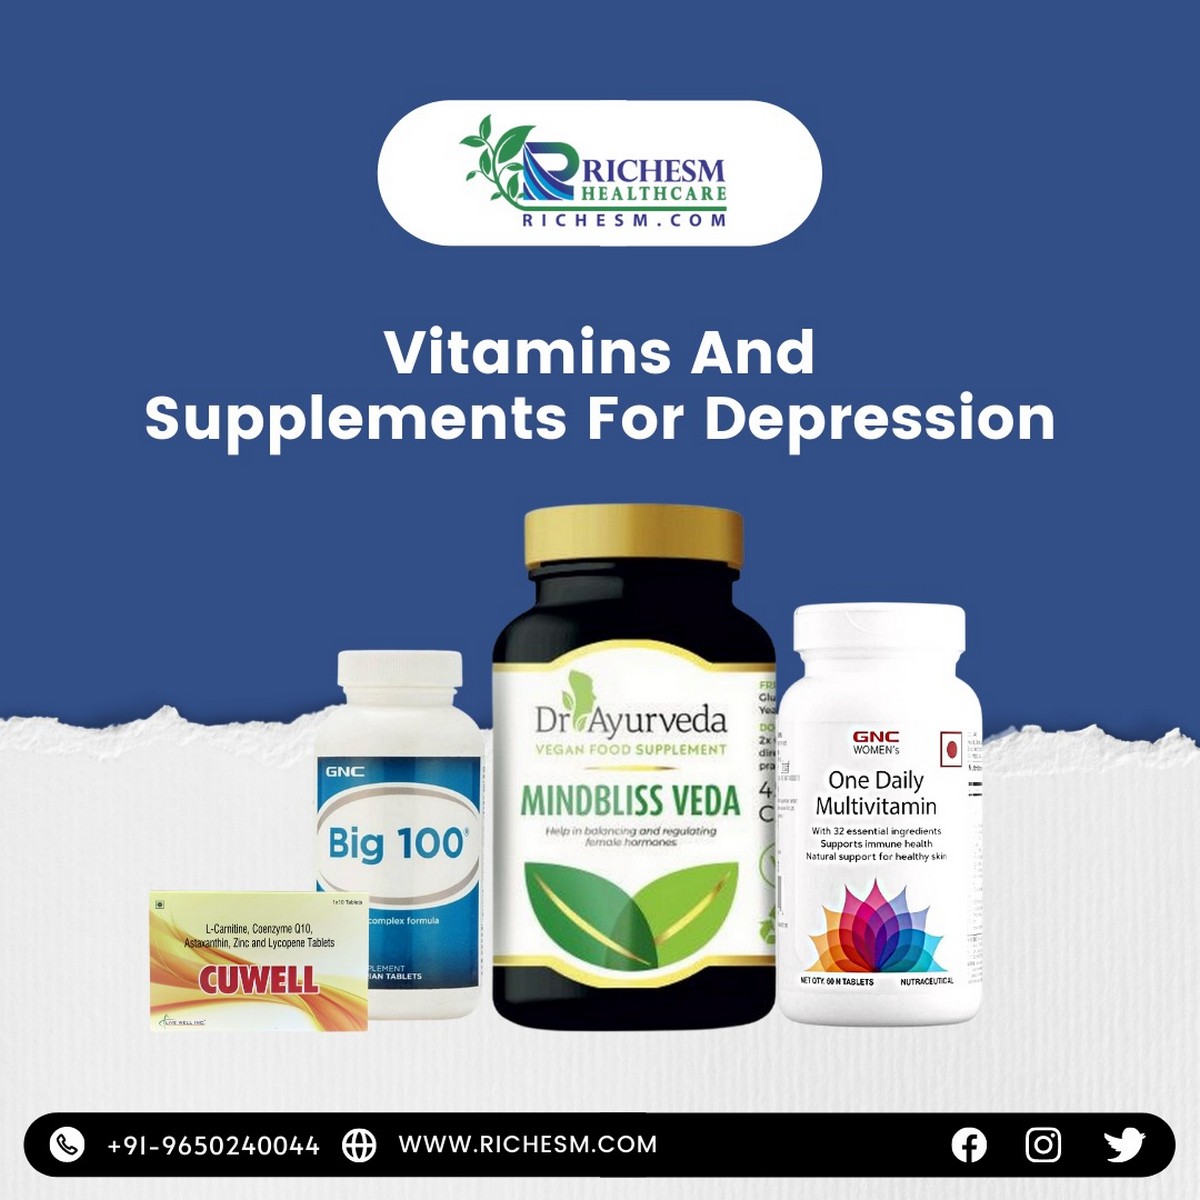 Vitamins And Supplements For Depression